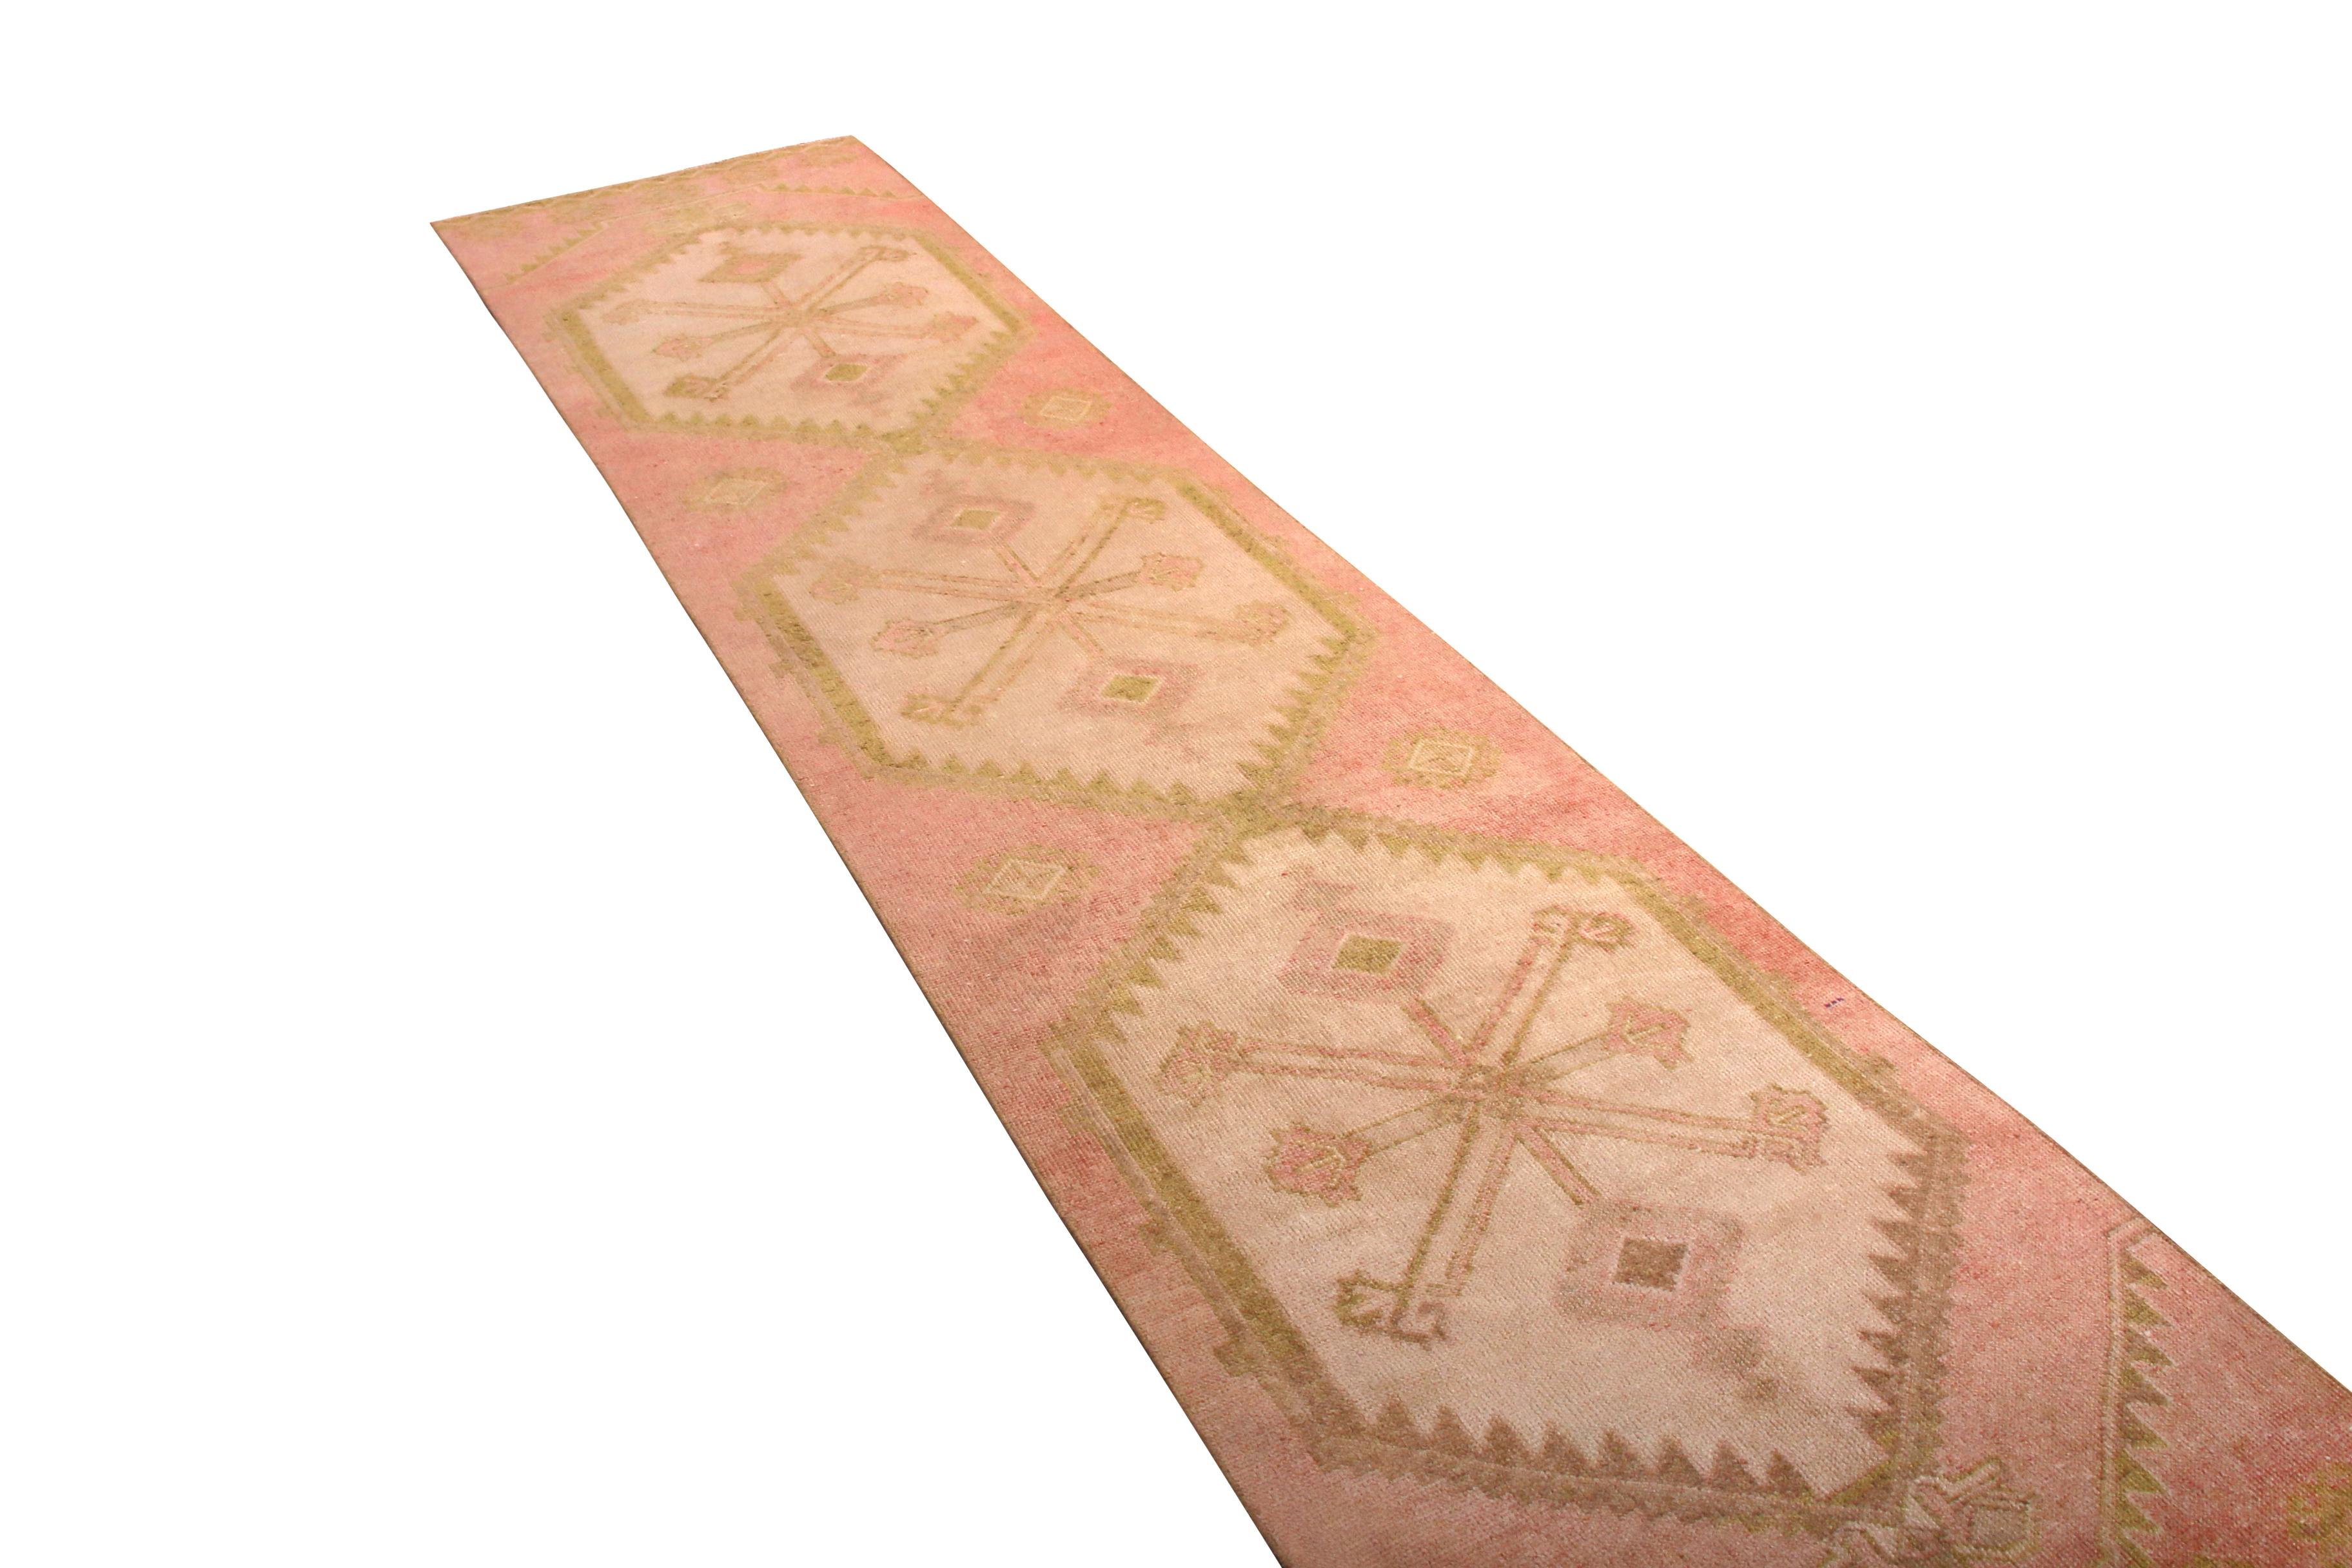 Made with handwoven wool originating from Turkey between 1950-1960, this vintage midcentury Kilim runner enjoys the distinction and gentility of a seldom-seen pink colorway, gracefully accented by a play of golden-beige and cream hues lending a